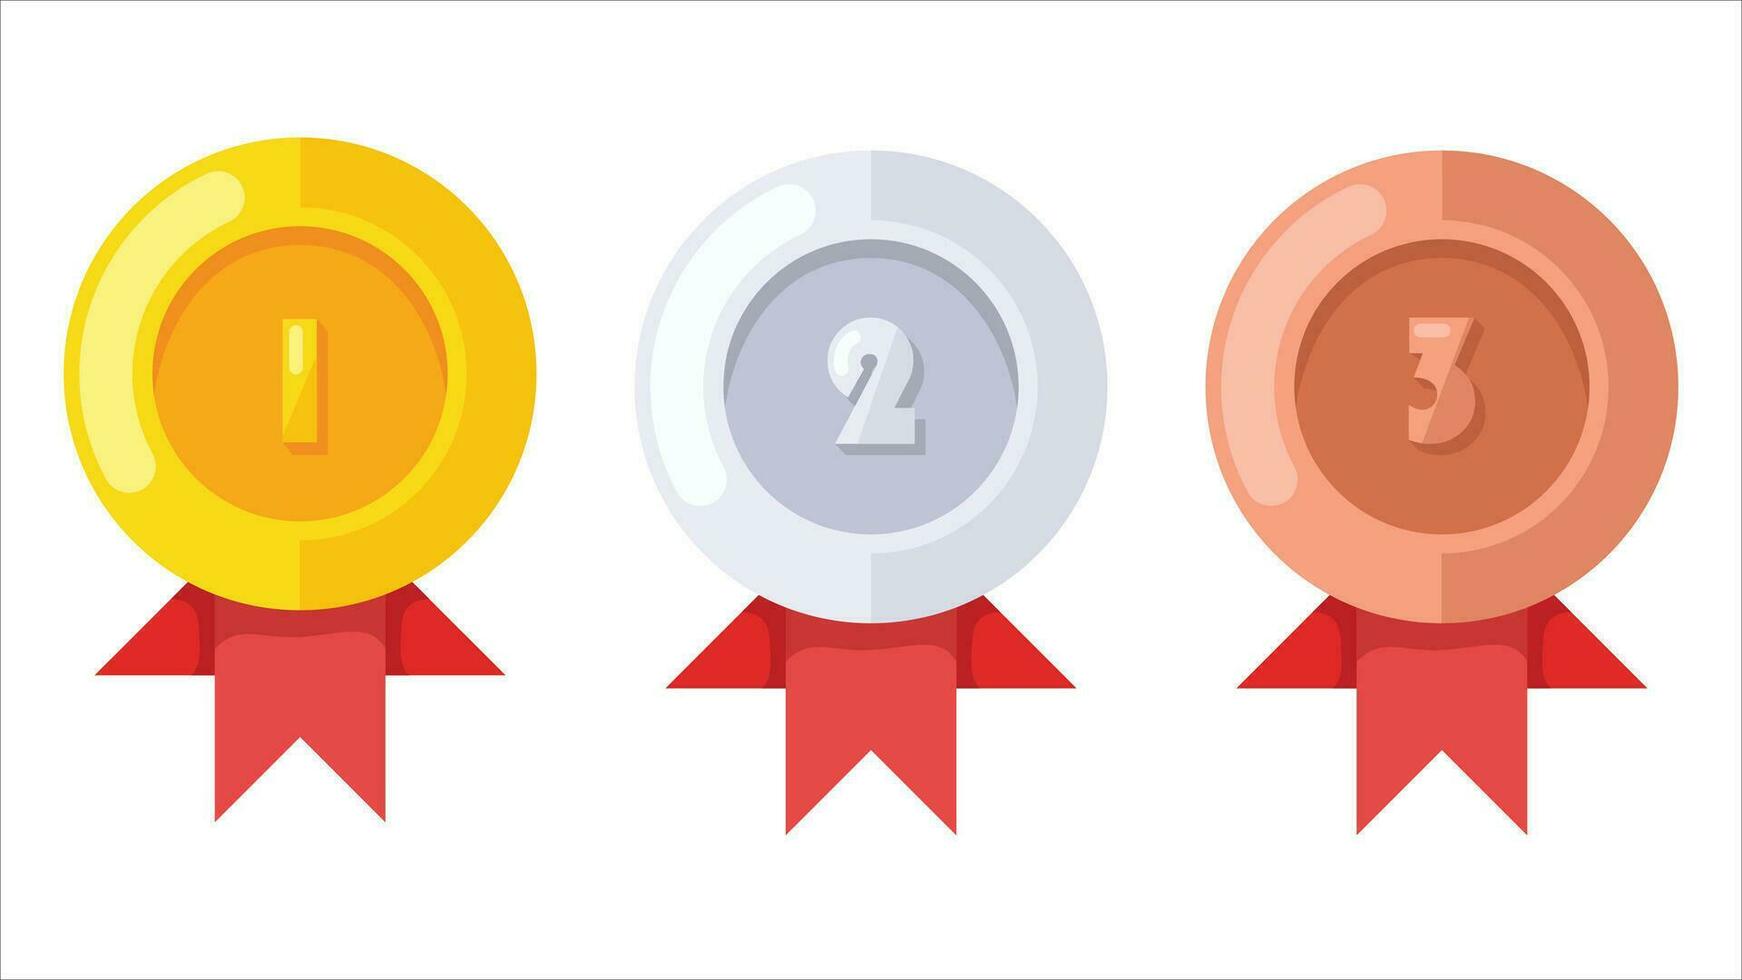 Set of gold, silver and bronze medals. winner badges for first, second and third places. 1st, 2nd and 3d prizes. vector illustration